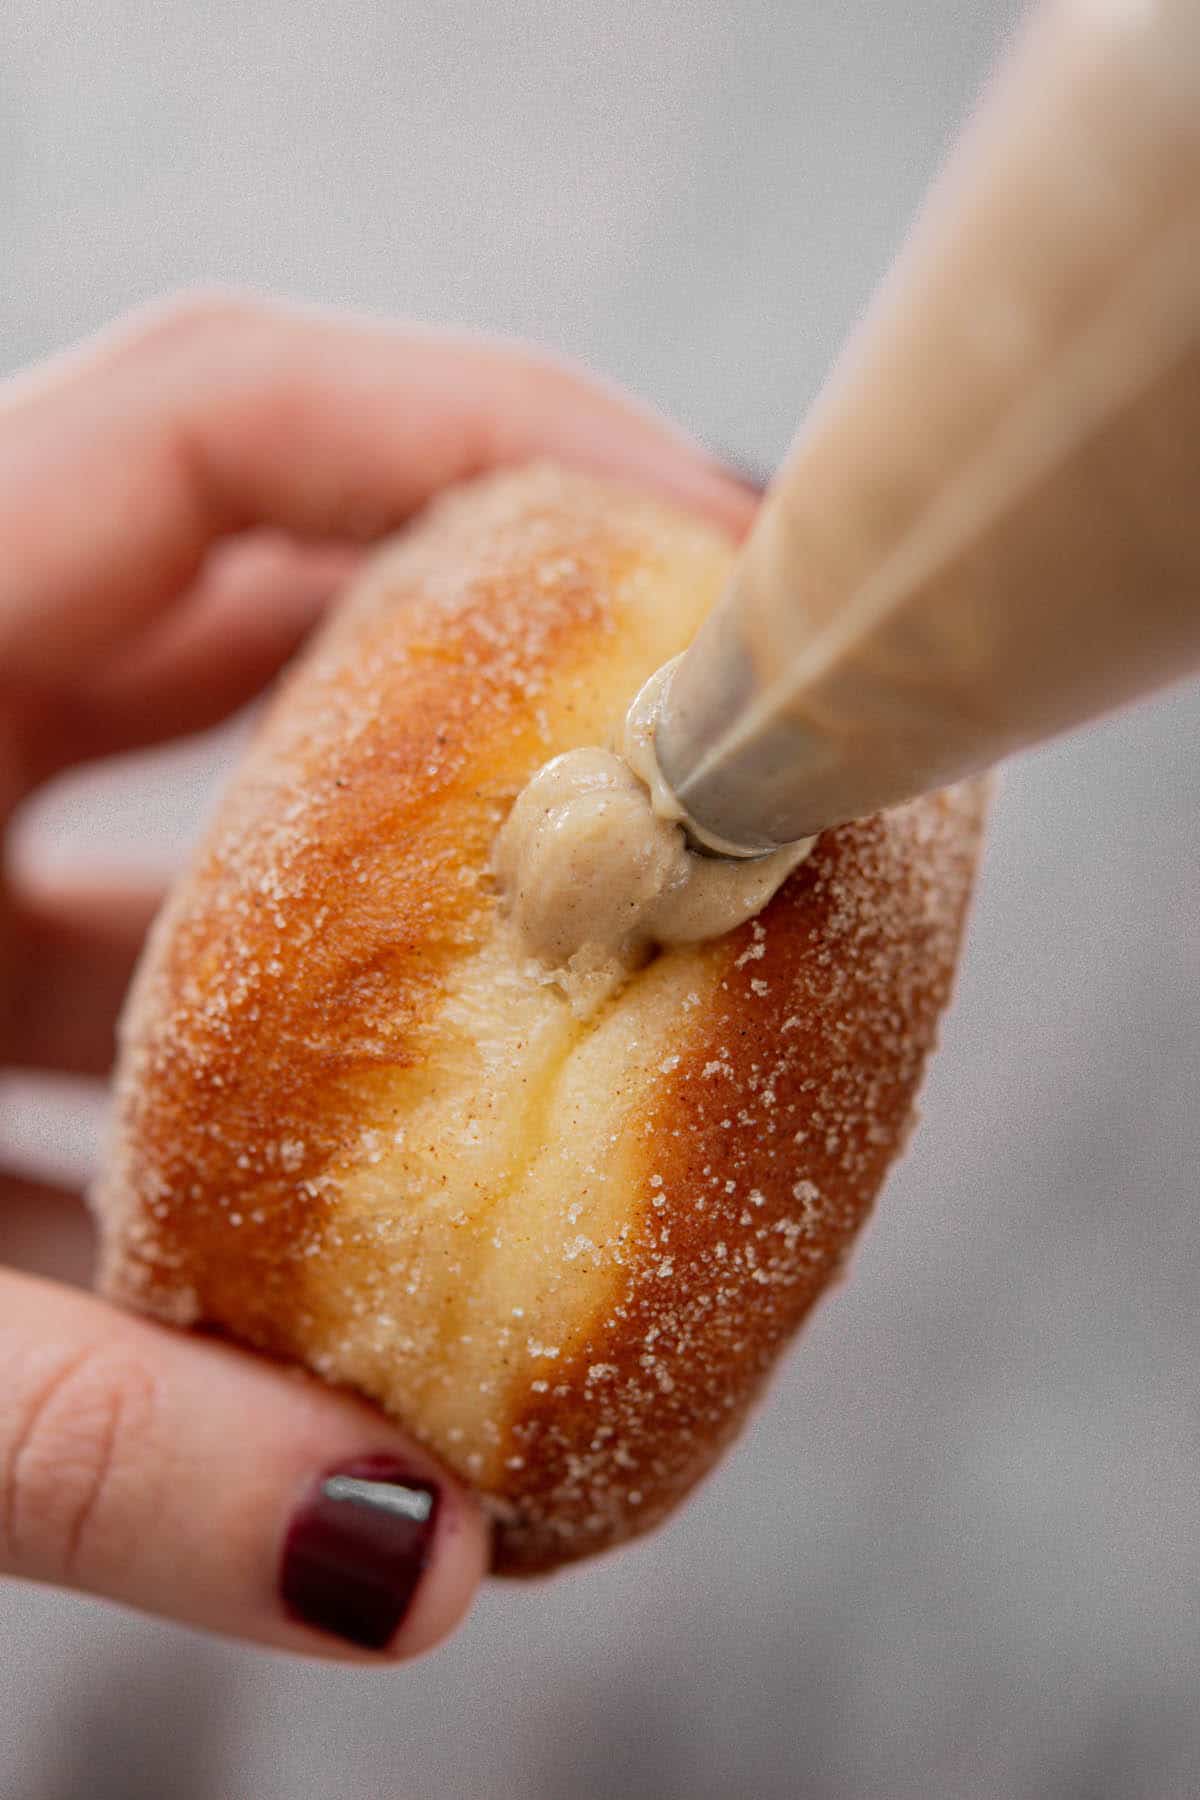 gingerbread custard being piped into doughnut.